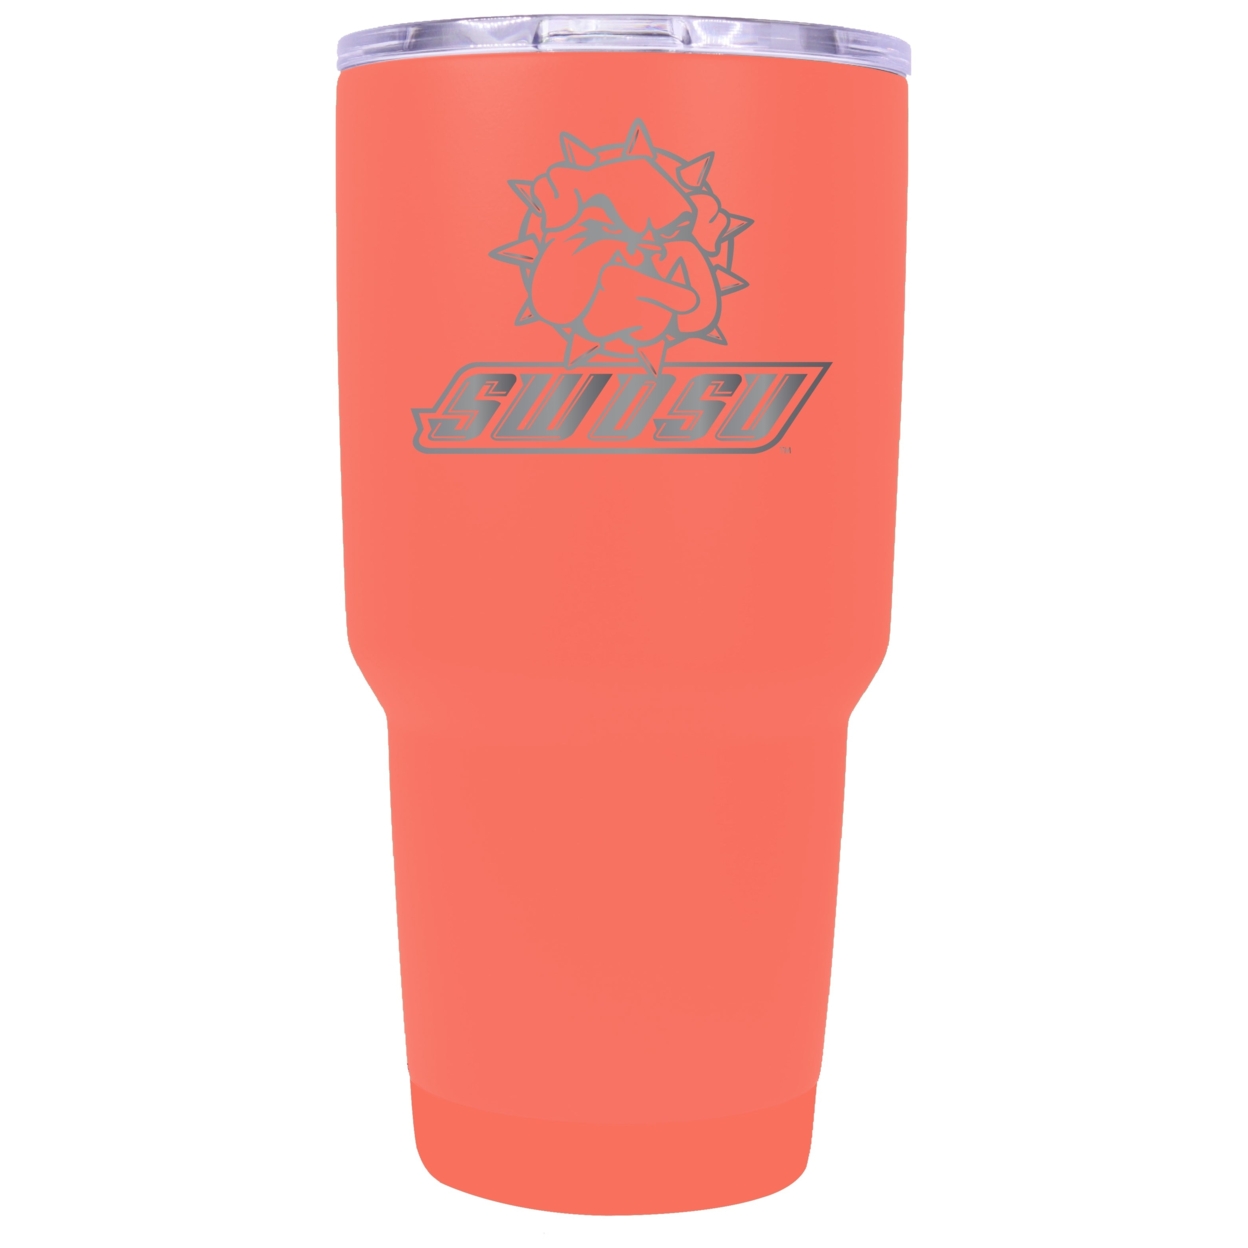 Southwestern Oklahoma State 24 Oz Insulated Tumbler Etched - Choose Your Color - White